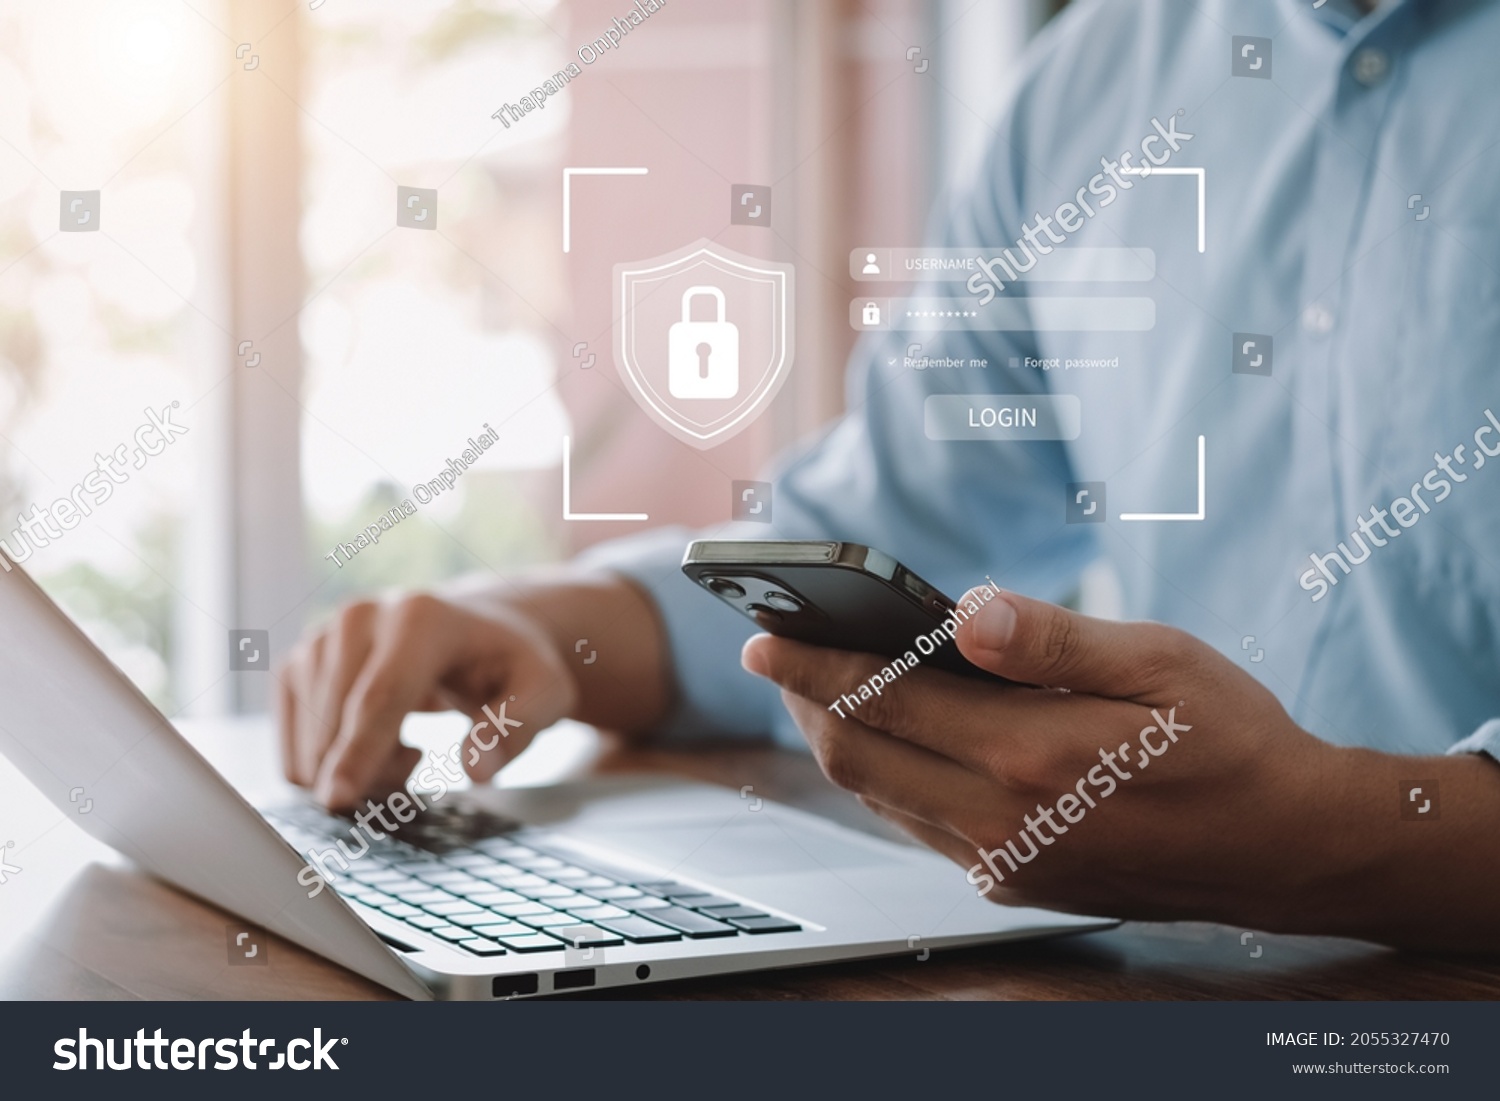 Concept of cyber security, information security and encryption, secure access to user's personal information, secure Internet access, cybersecurity. #2055327470